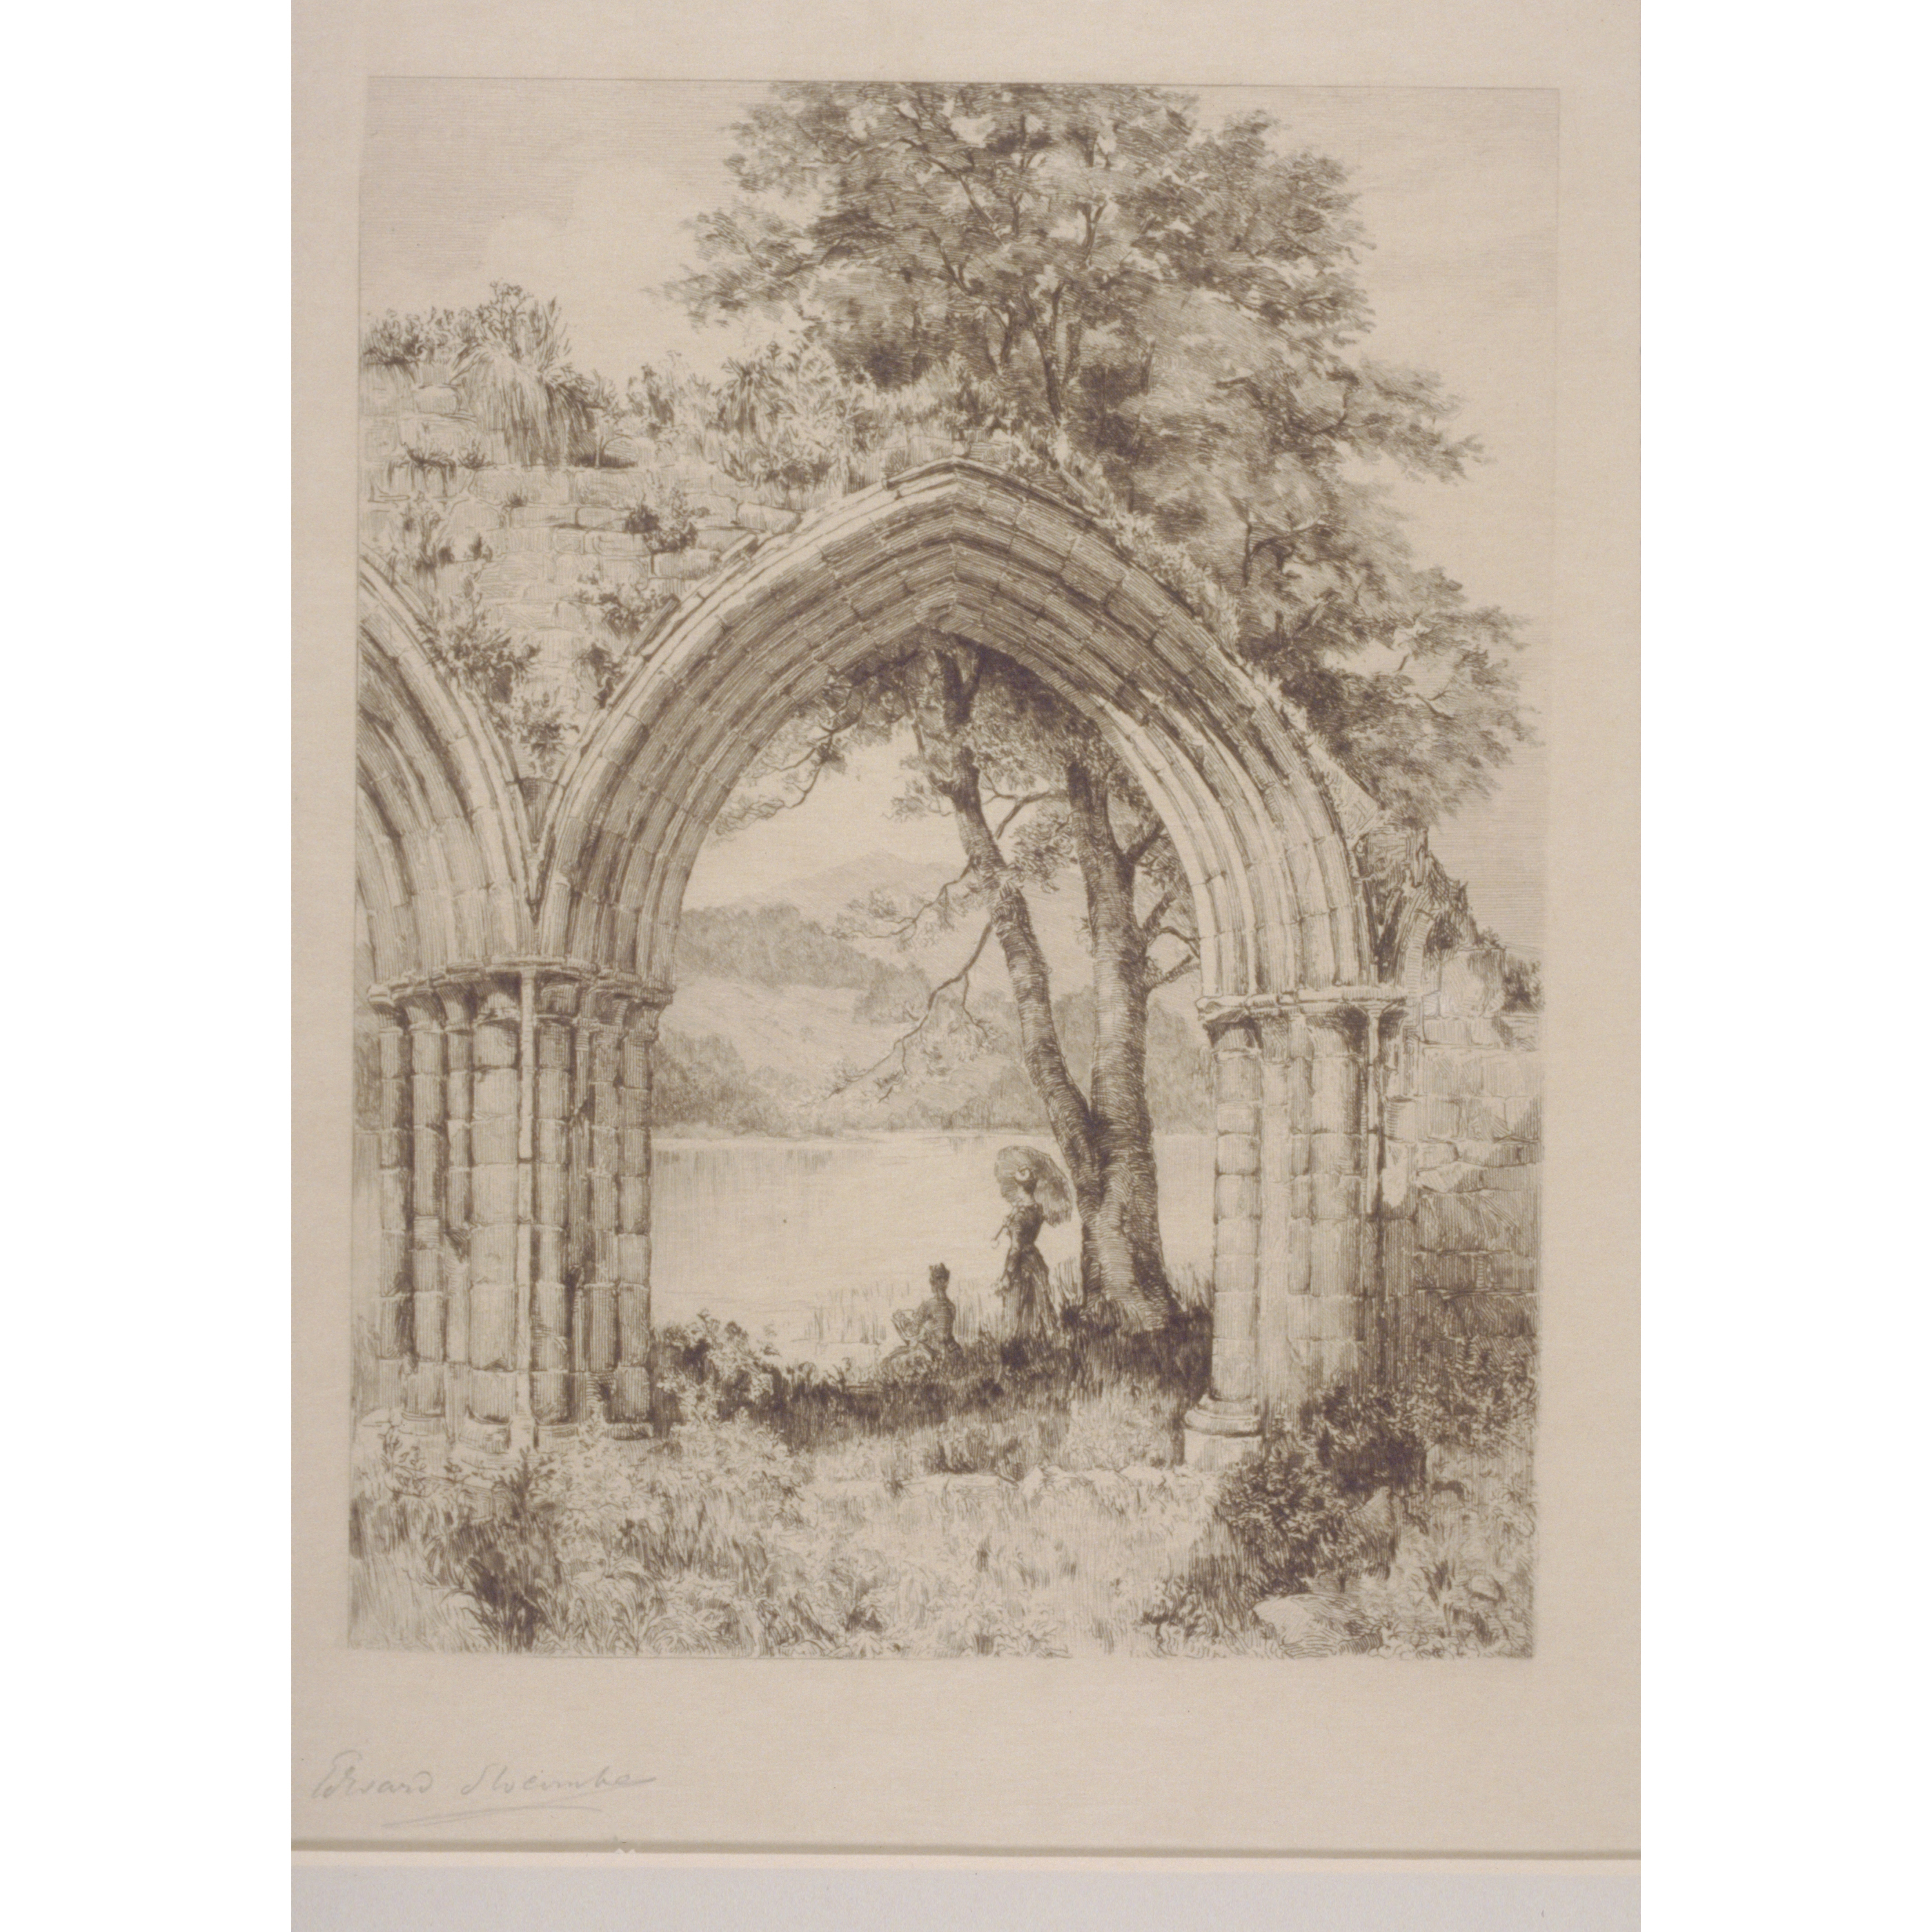 The Forth: Lake of Menteith from Inchmahome Priory